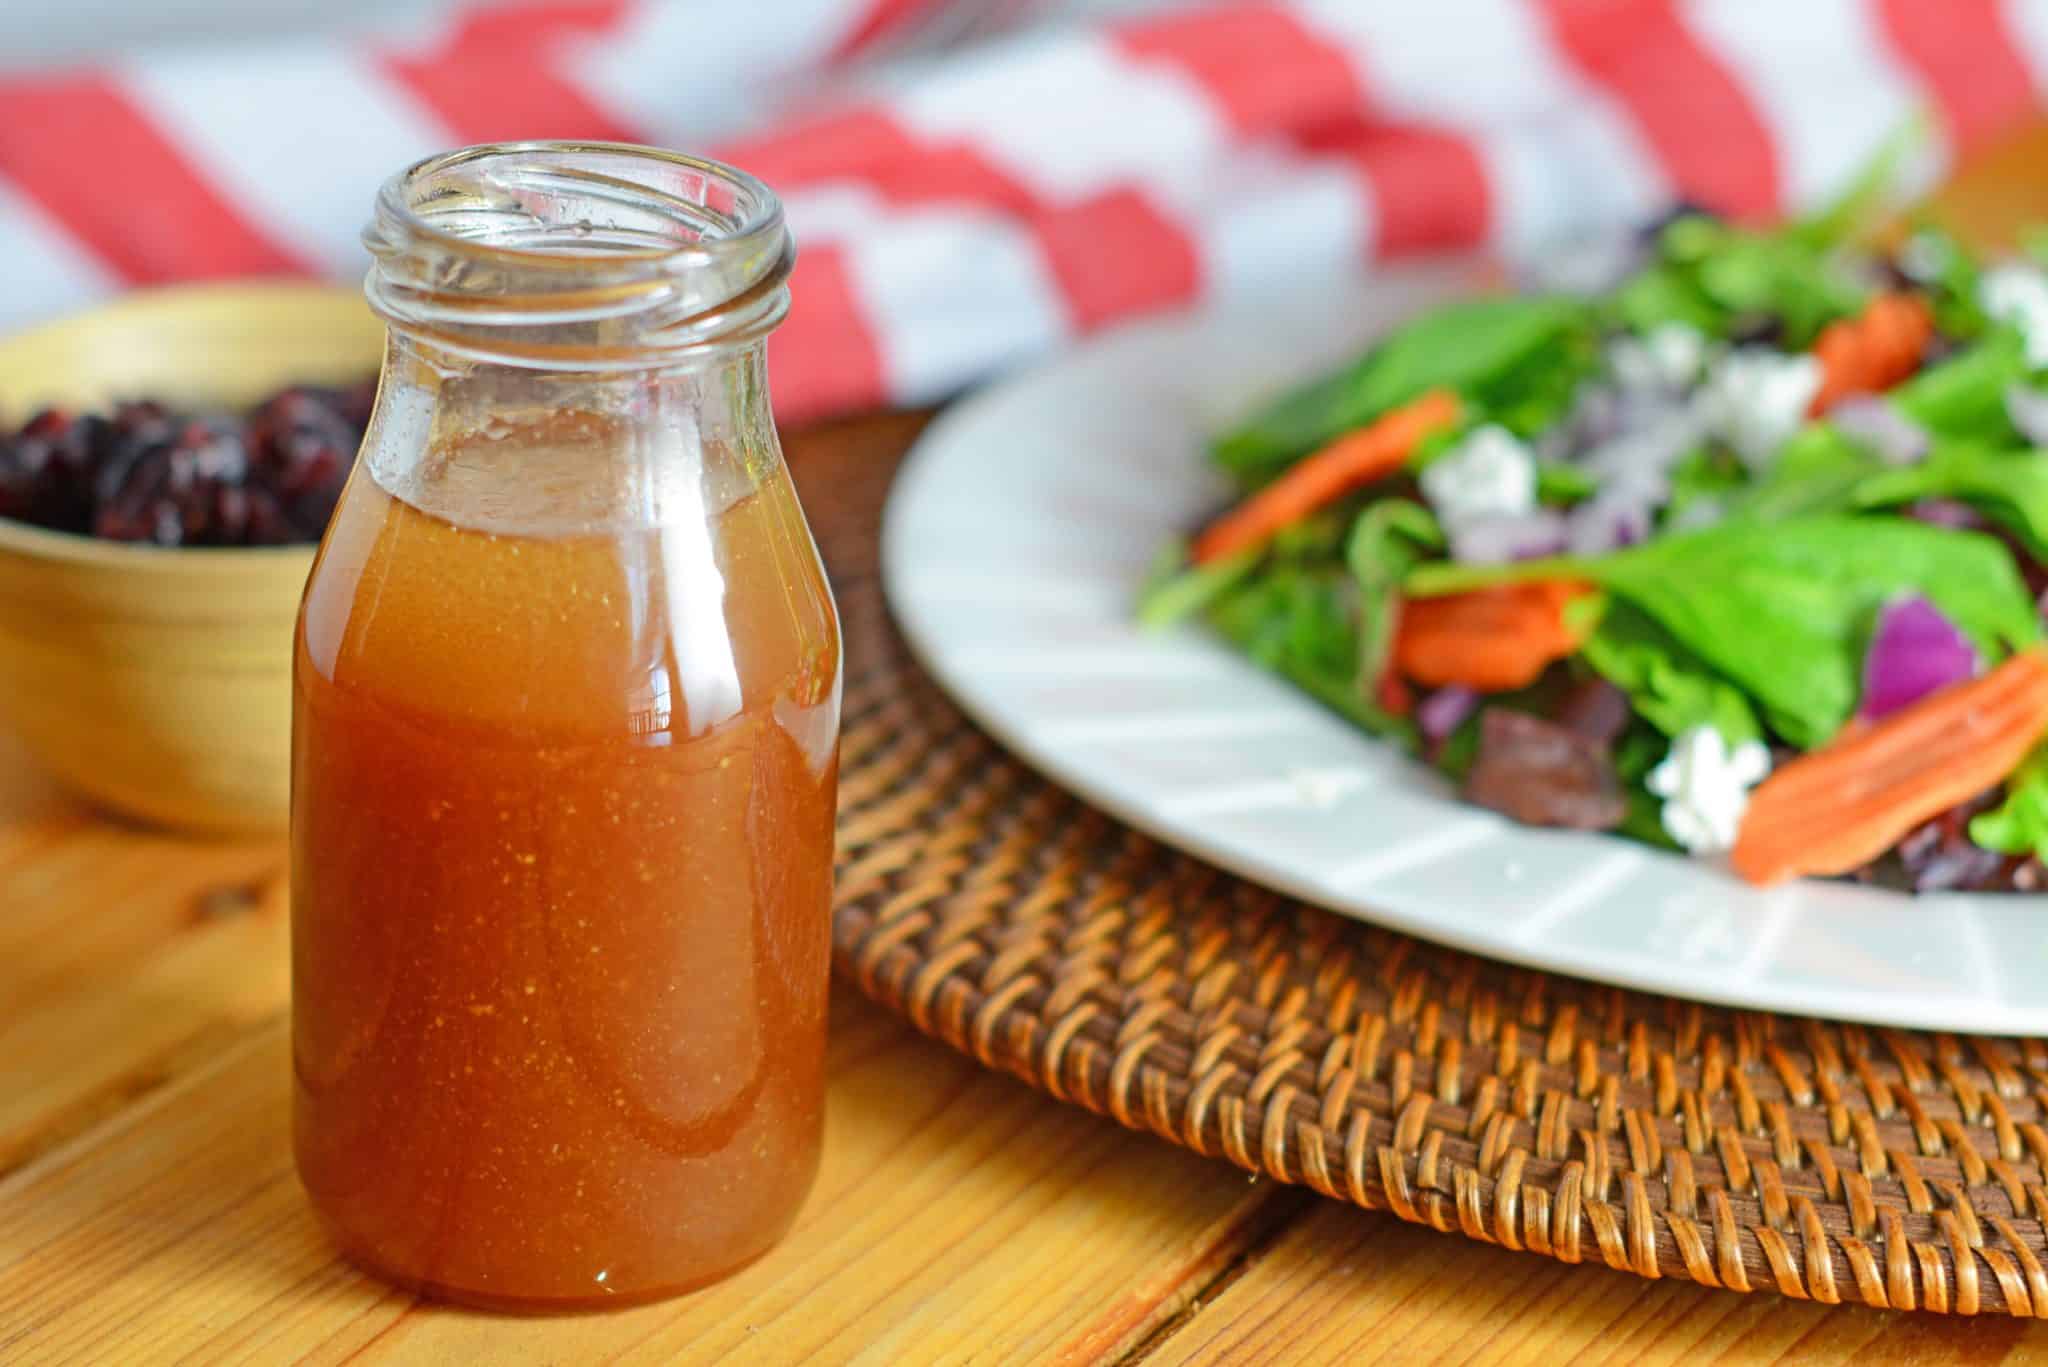 Dijon Vinaigrette is a tasty and simple homemade salad dressing that will compliment any salad or grilled vegetable platter.